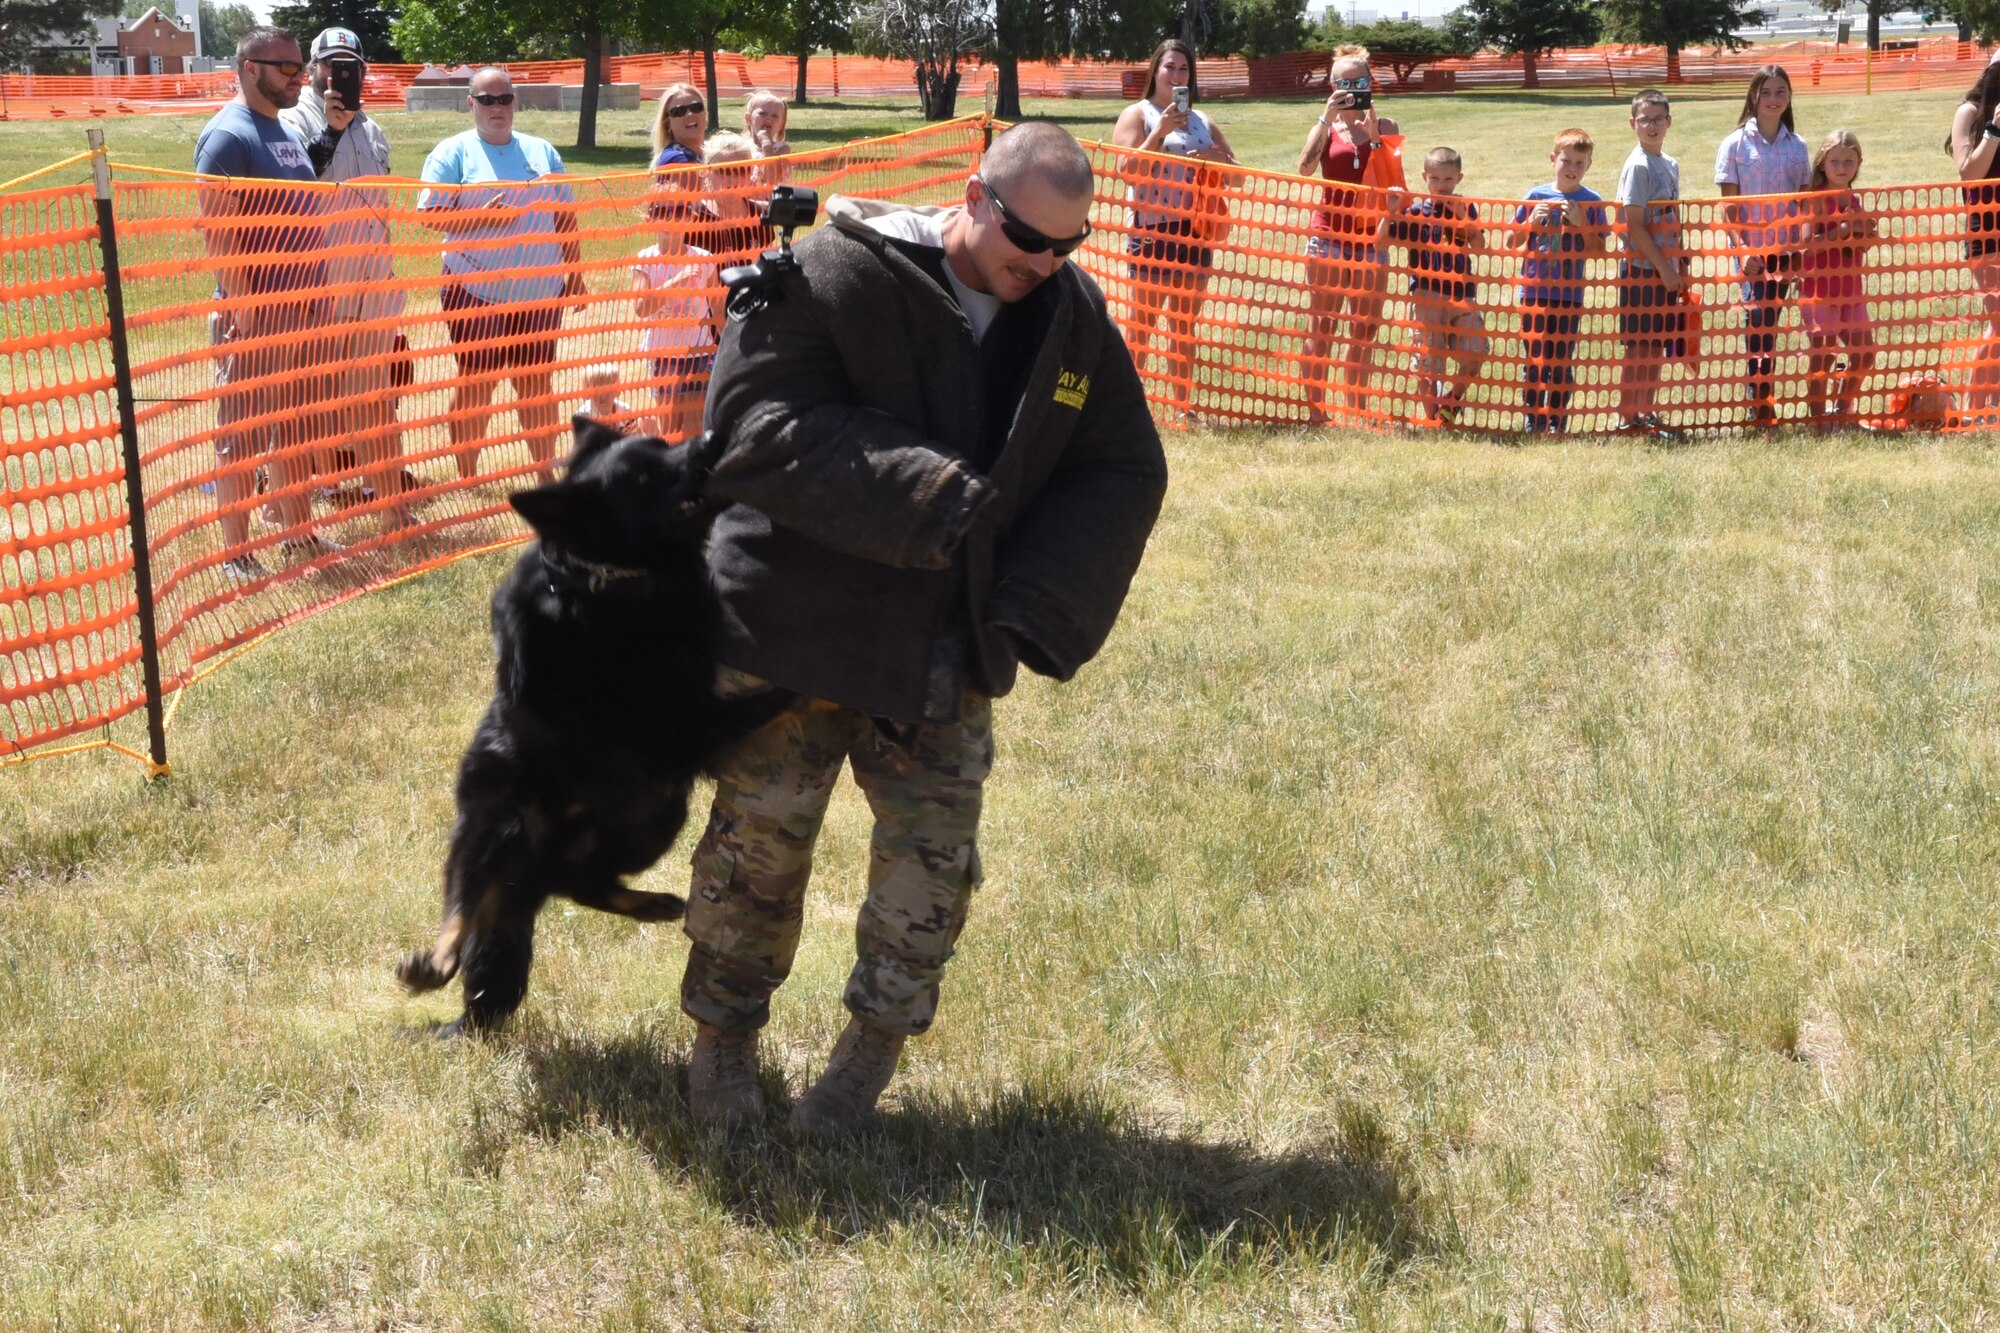 Staff Sgt. Curtis Shannon, 90th Security Forces Squadron military working dog handler, acts as non-compliant perpetrator during a K-9 exhibition at Fort D.A. Russell Days on F.E. Warren Air Force Base, Wyo., July 19, 2019. The open house gives the community the opportunity to see the history behind the base and its role within the nation’s defense.  (U.S. Air Force photo by Terry Higgins)